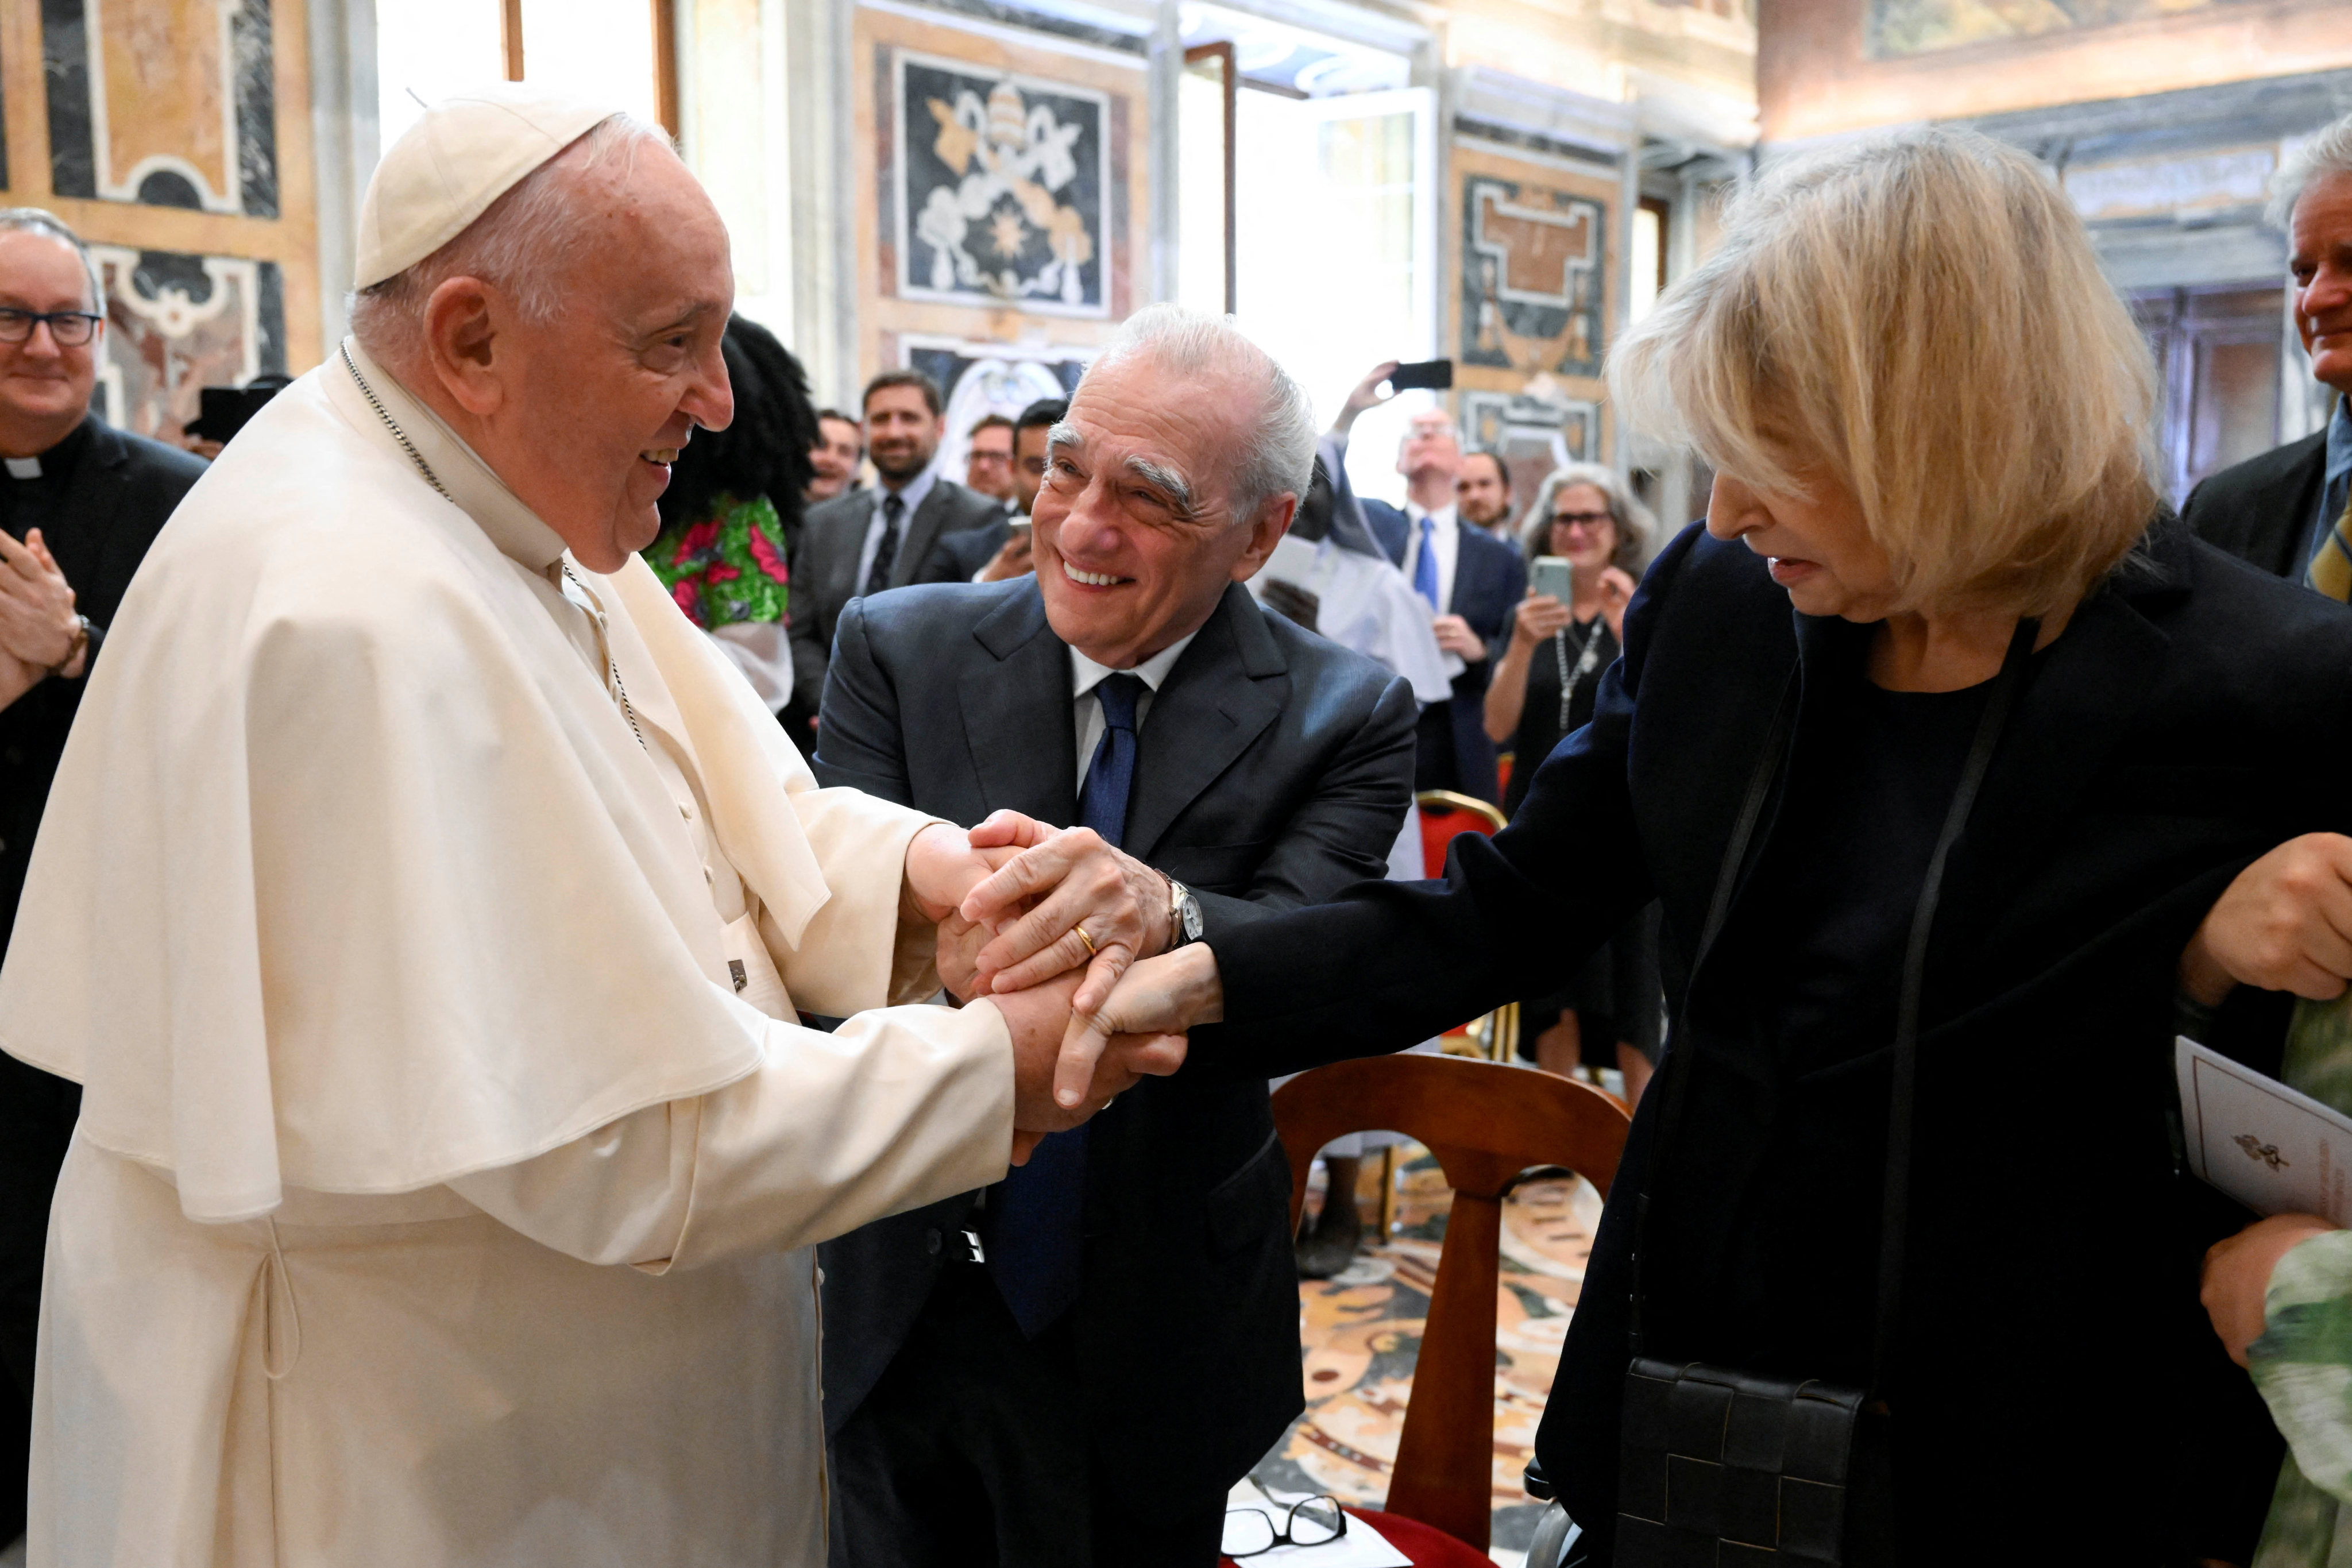 Pope Francis meets film director Martin Scorsese and his wife Helen Morris at the Vatican in Rome, Italy on Saturday. Photo:  Vatican Media / ­Handout via Reuters